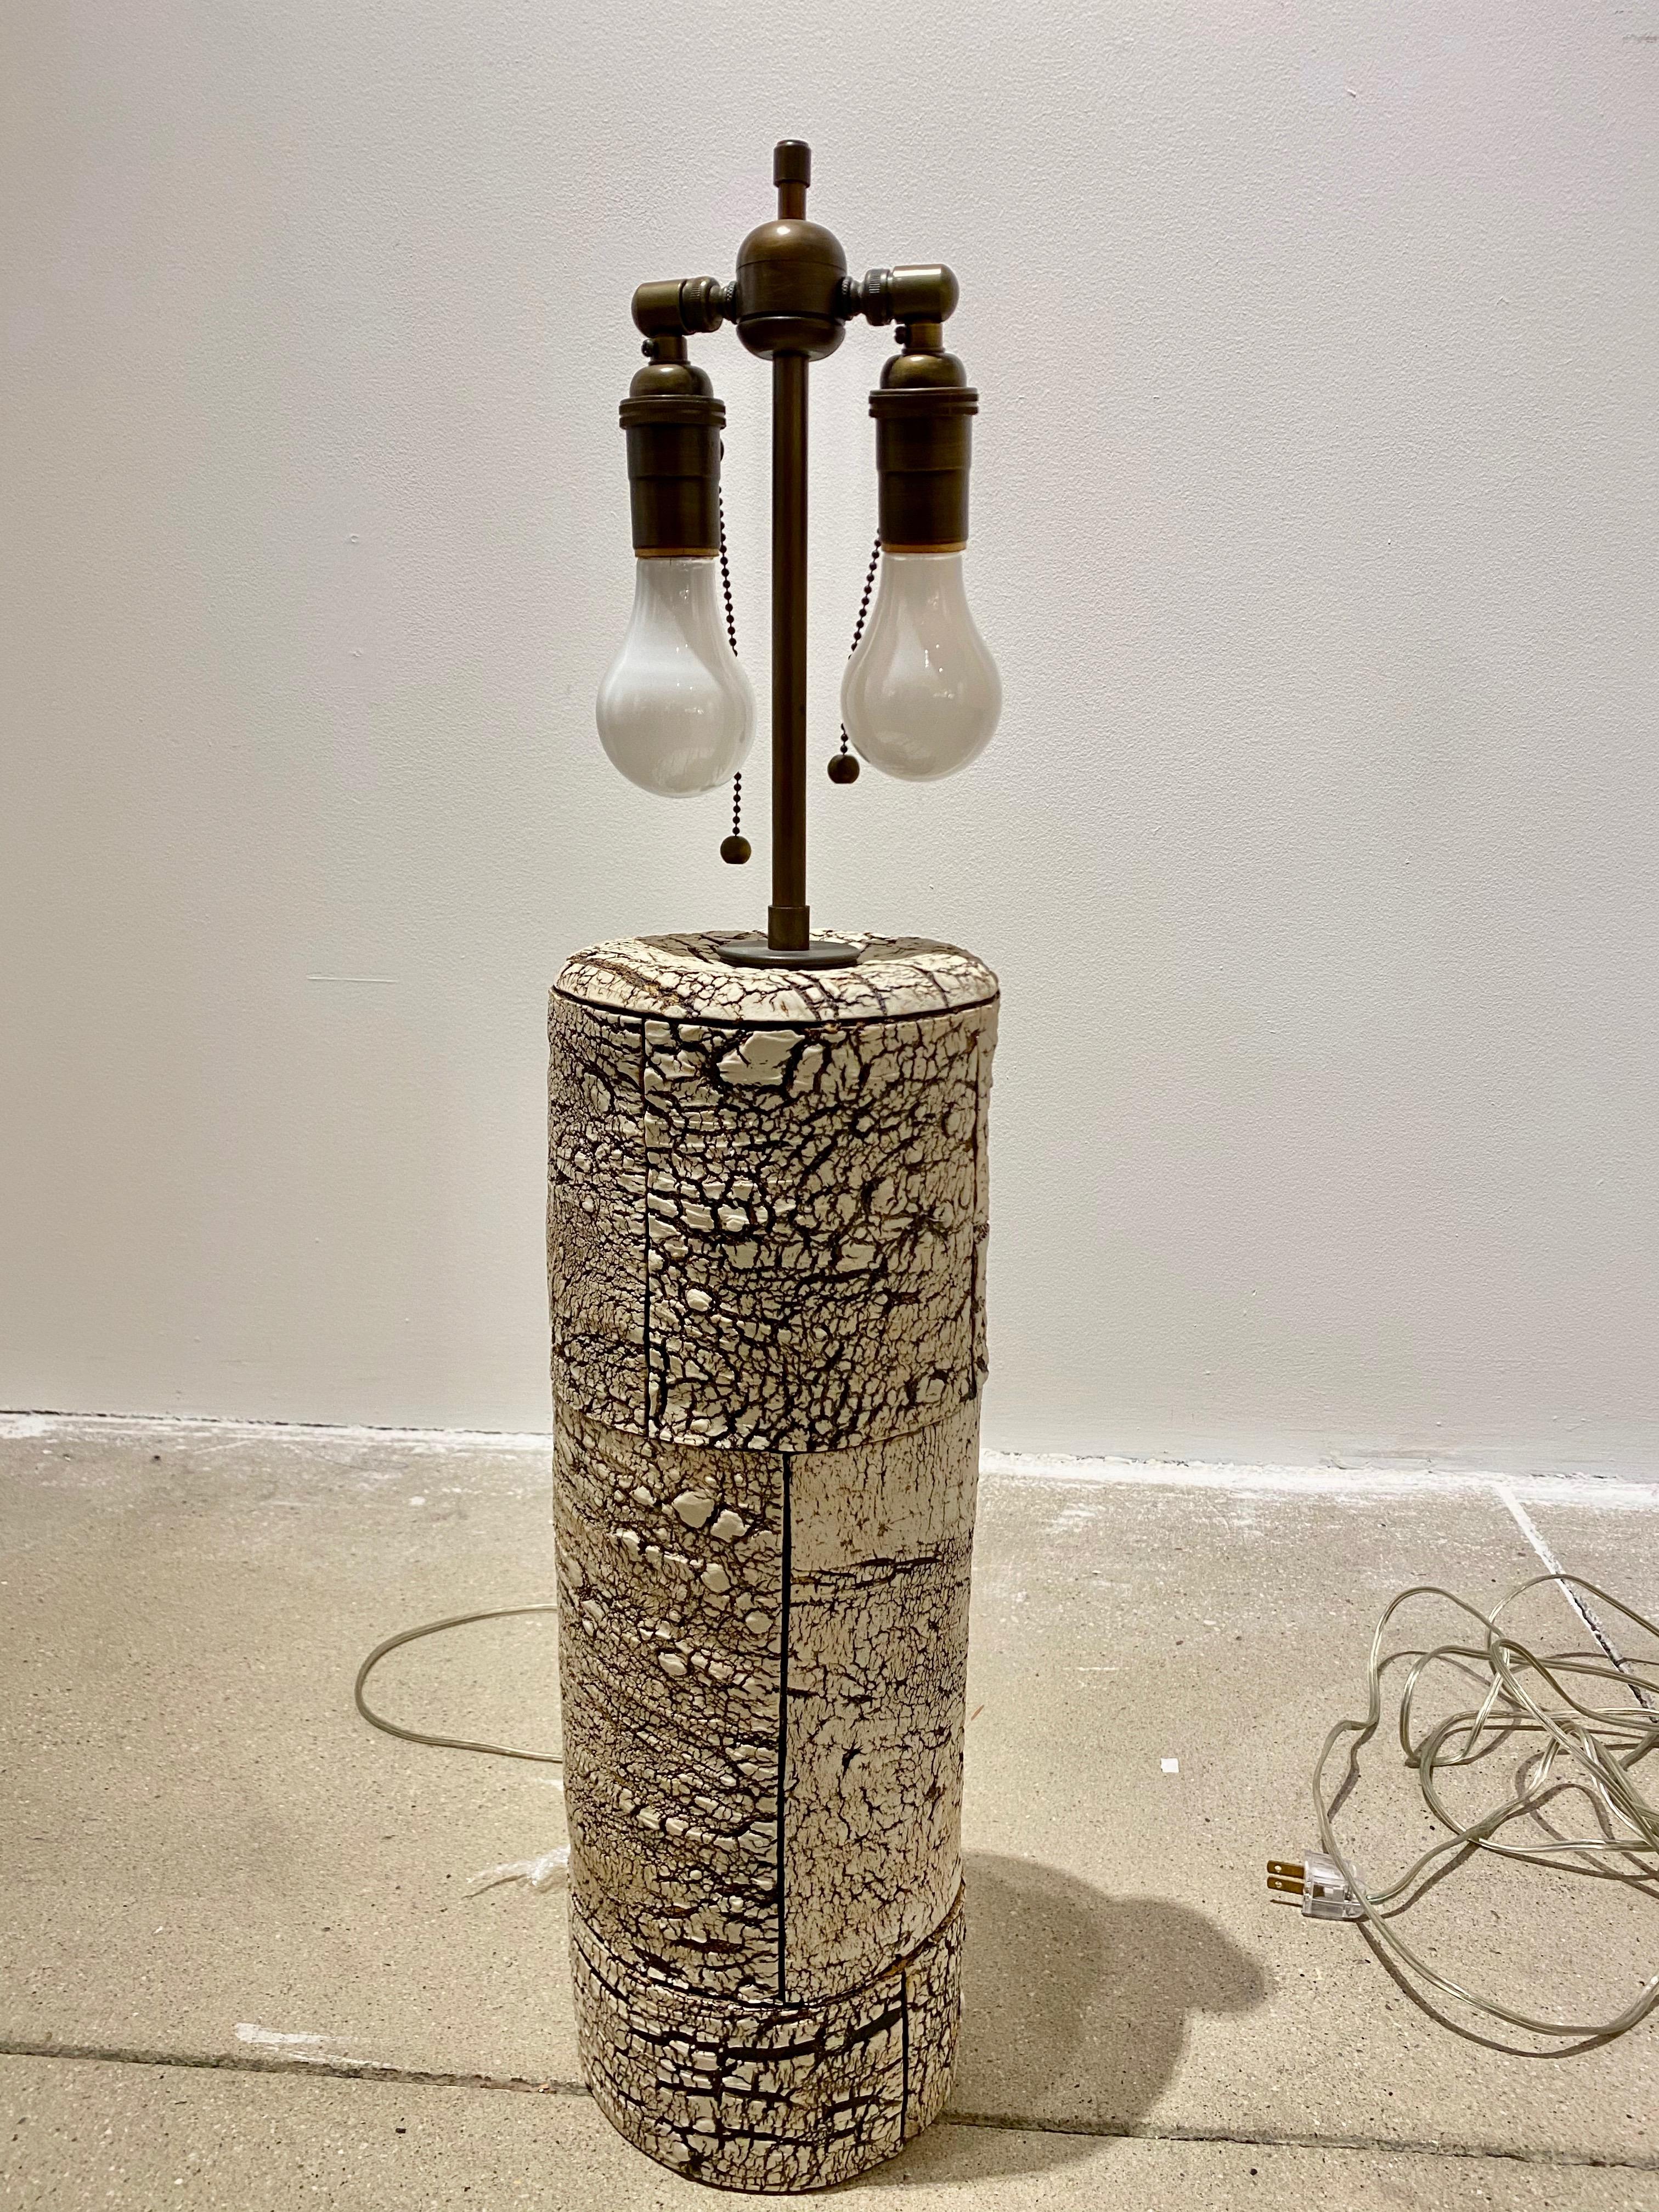 Peter Lane is an American ceramic artist who has exhibited at FOG design and art fair and at the Bass Museum of Art. He introduced the birch bark finish in mid-2000s and this lamp was produced a little later. Signed on back. White linen drum shade.